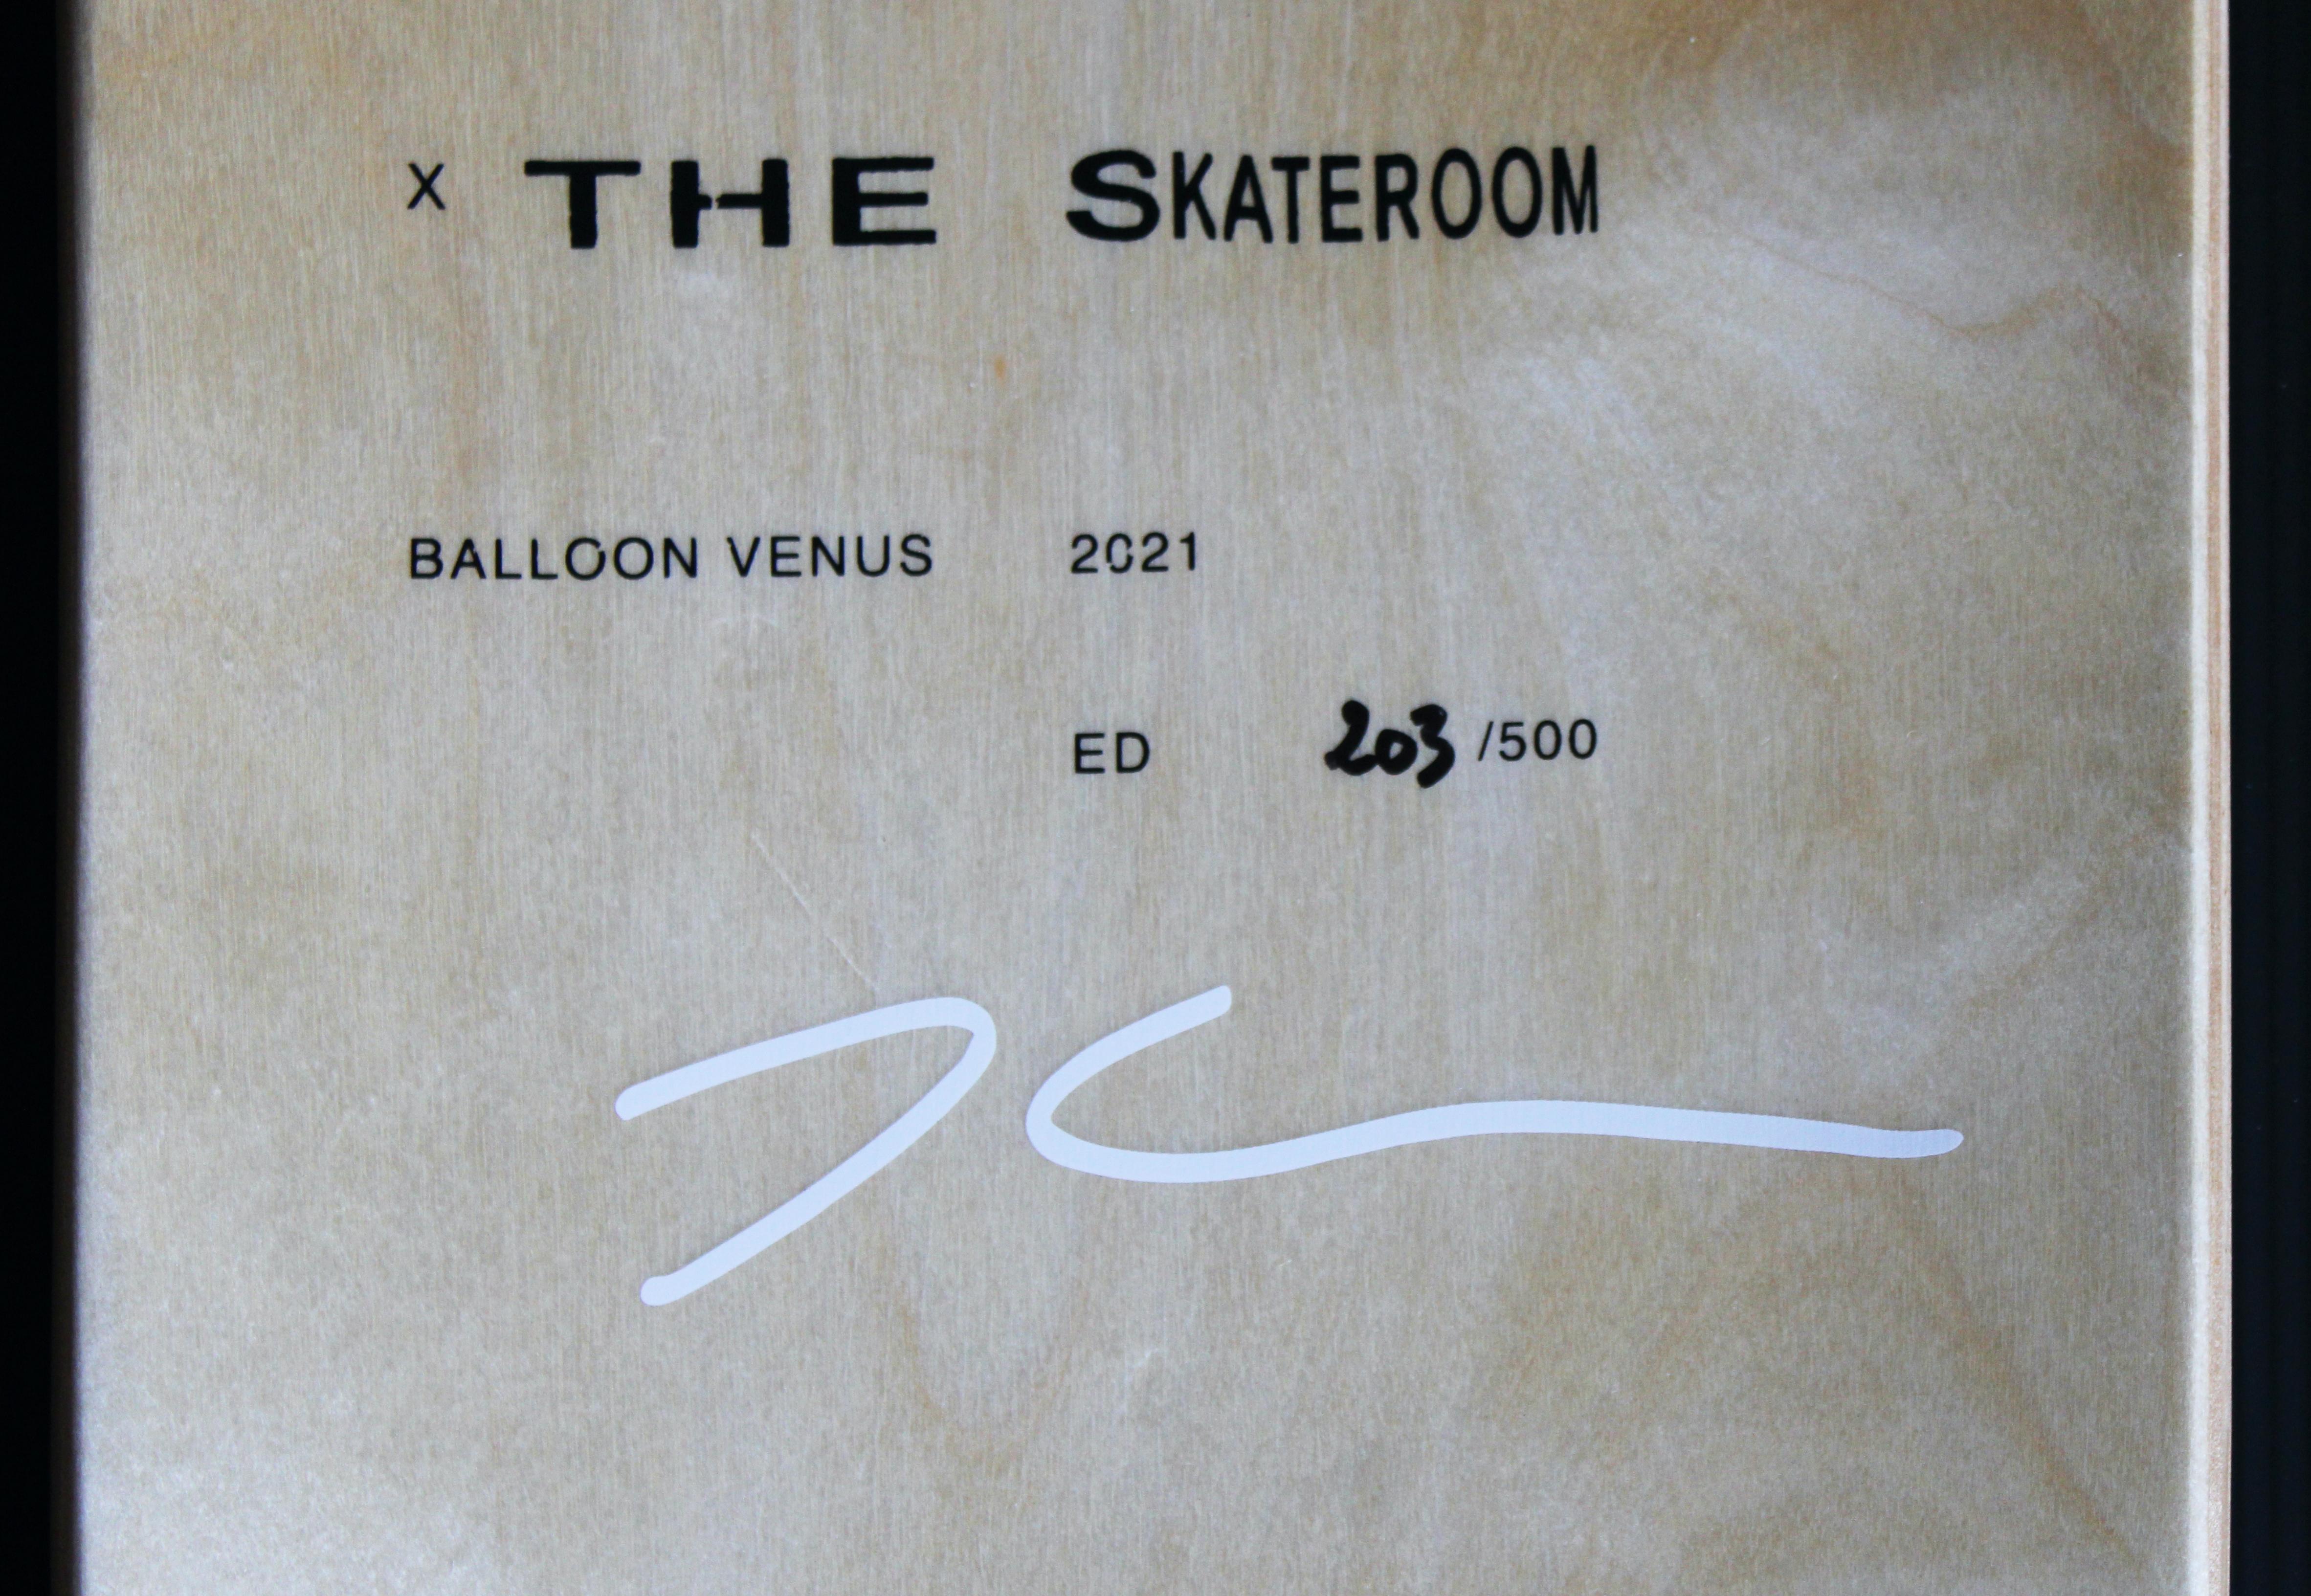 BALLOON VENUS
2021
Print on two skateboards, multiple 203/500 
cm 80 x 20 eachone
Signed, titled, dated and multiple number on the reverse: Jeff Koons / The Skateroom / Balloon Venus 2021 / ED. 203/500
Certificate of authenticity The Stateroom, with